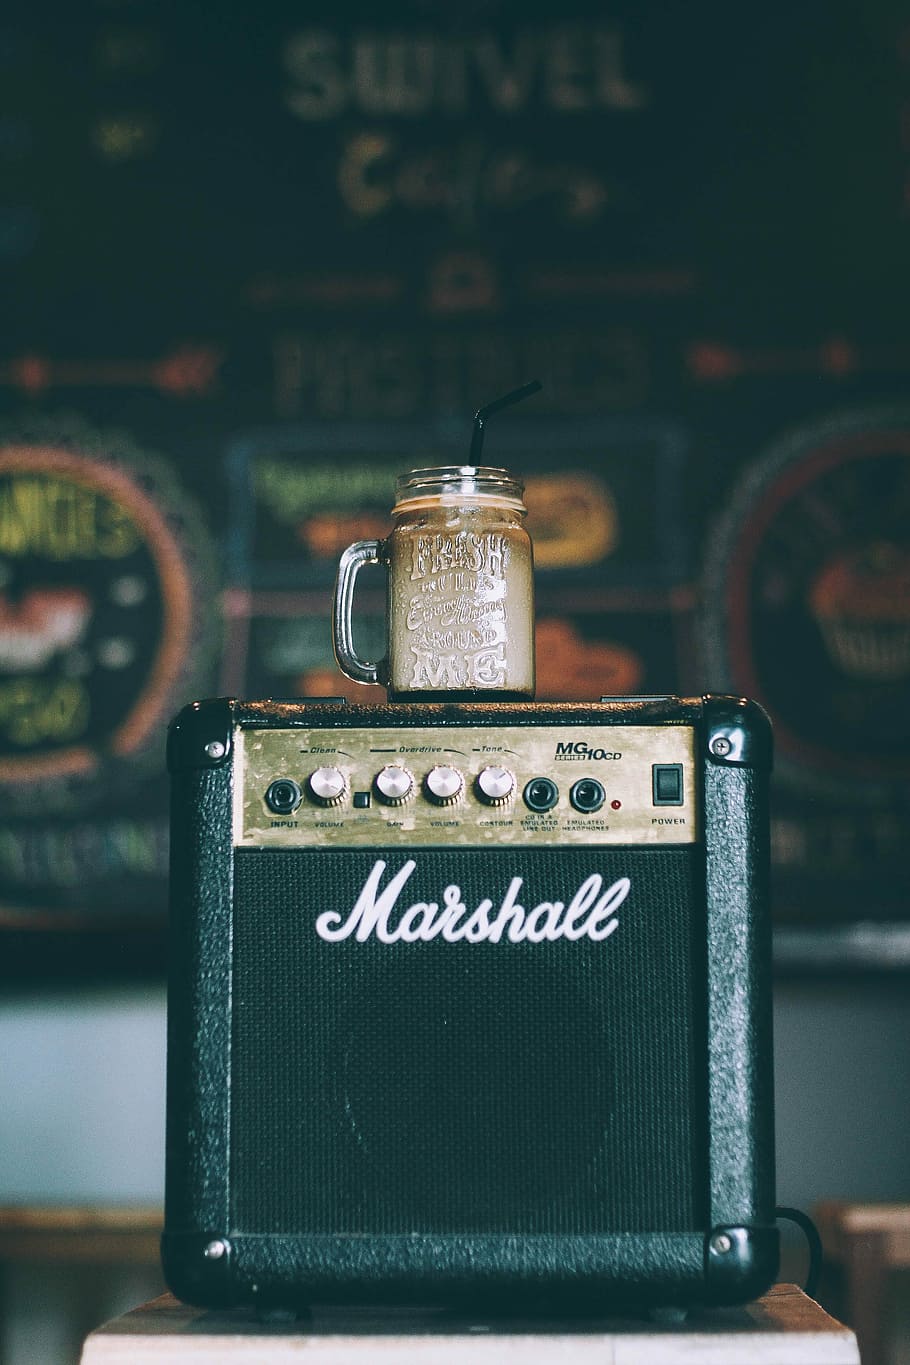 black Marshall guitar amplifier with glass mug on top filled with beverage, clear glass mason jar with coffee on black Marshall guitar amplifier, HD wallpaper